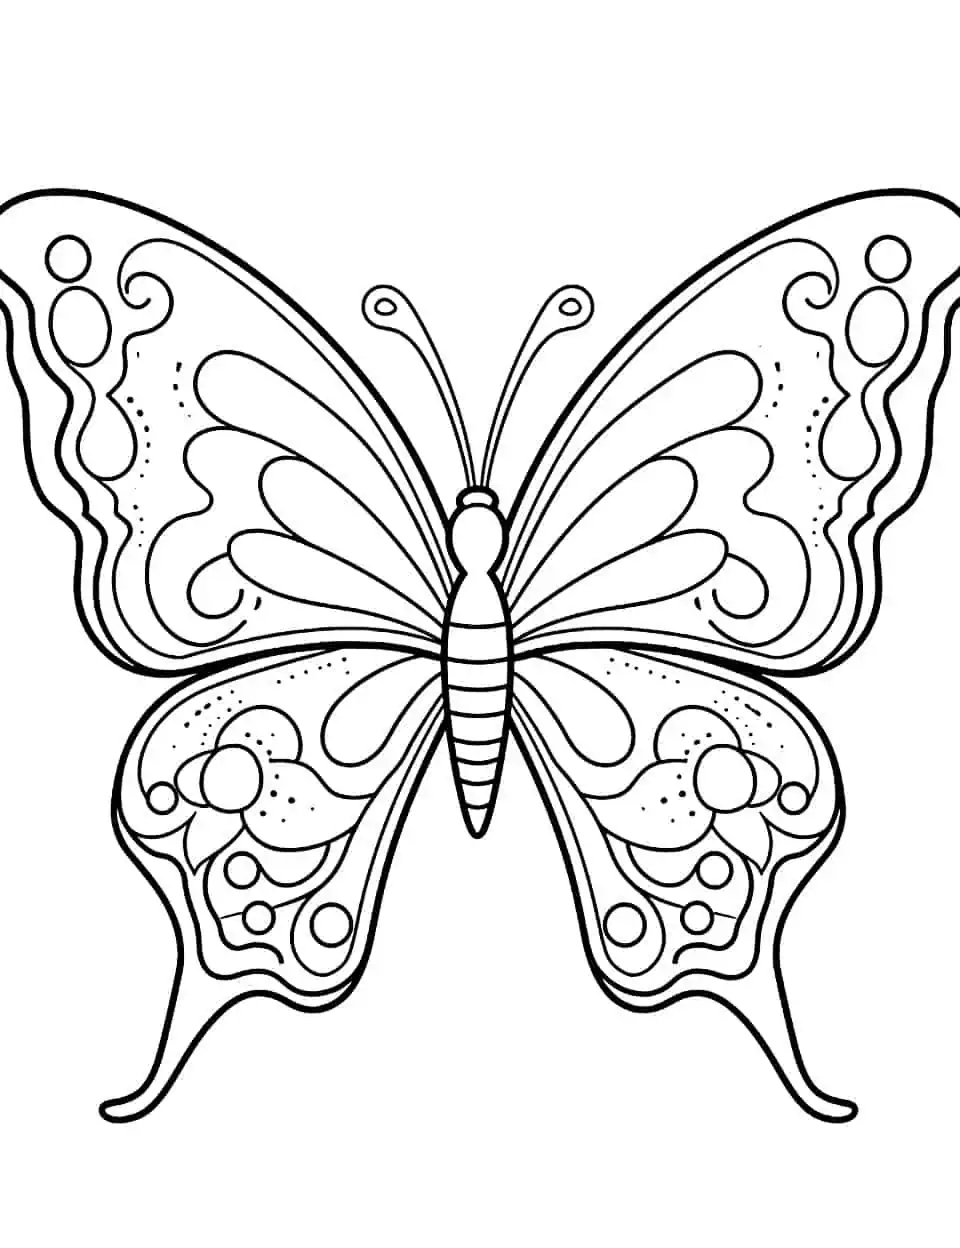 Intricate Intrigue Butterfly Coloring Page - A coloring page with a highly detailed butterfly design, perfect for older kids and adults.